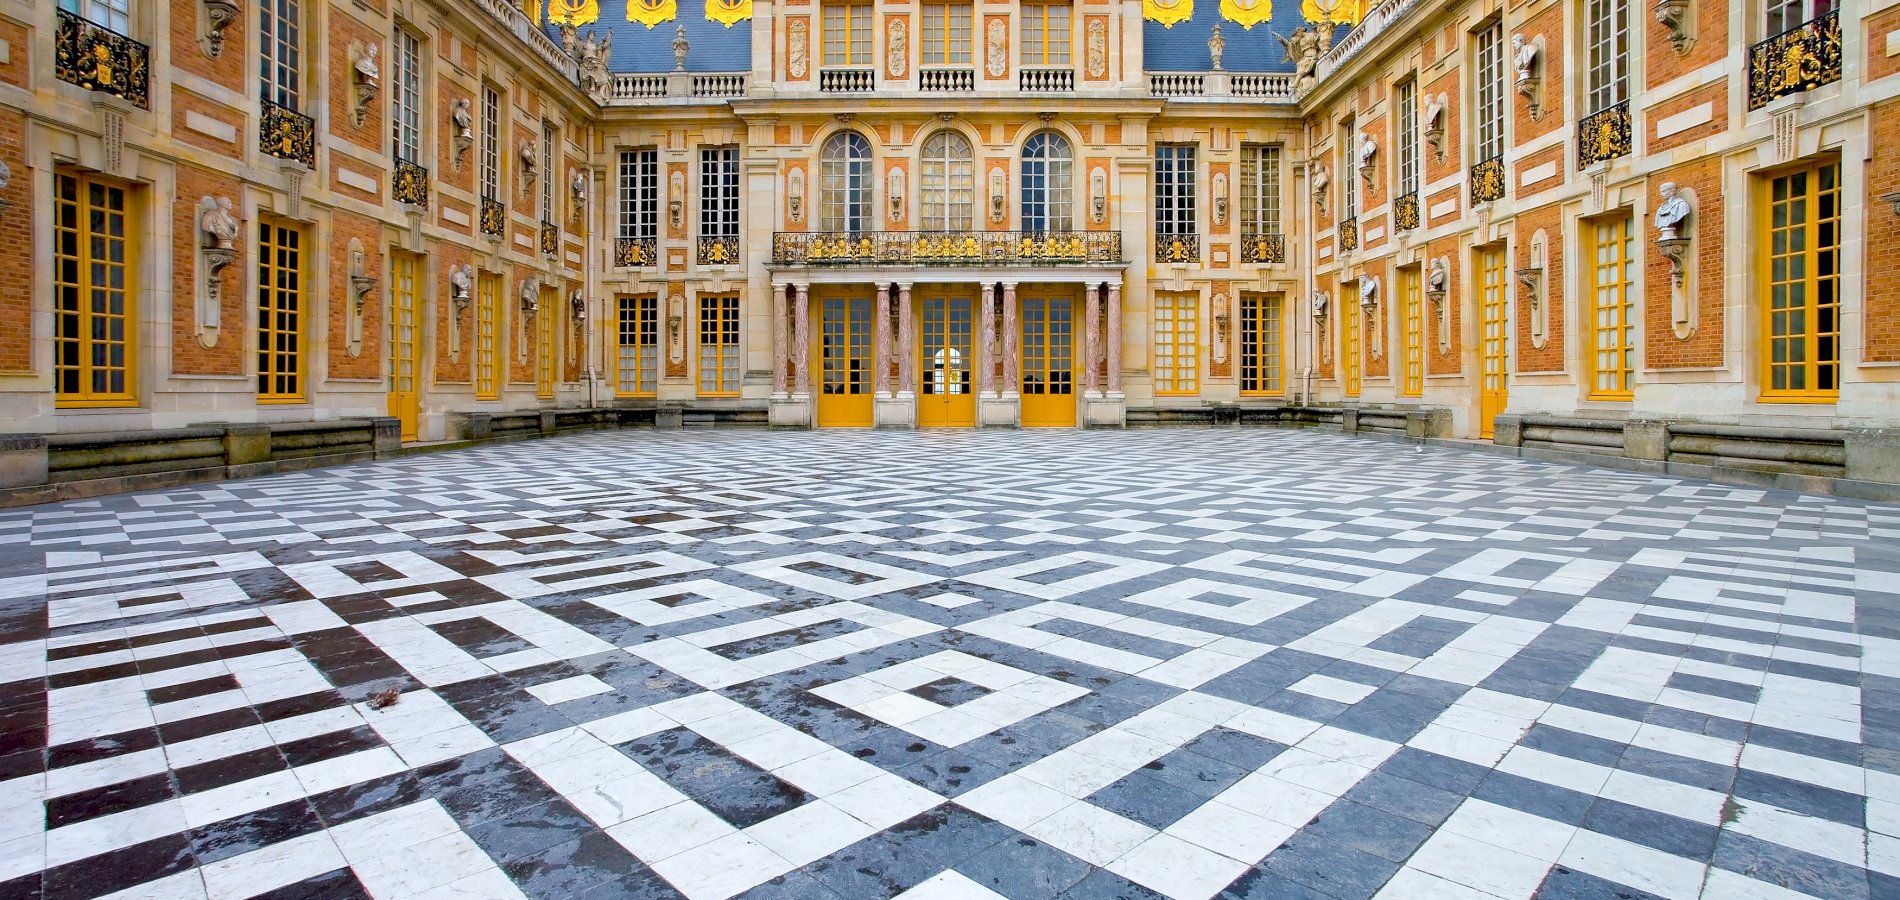 Ophorus Tours - Best of Versailles, Day Trip from Paris with Skip-the-Line Access and Lunch included